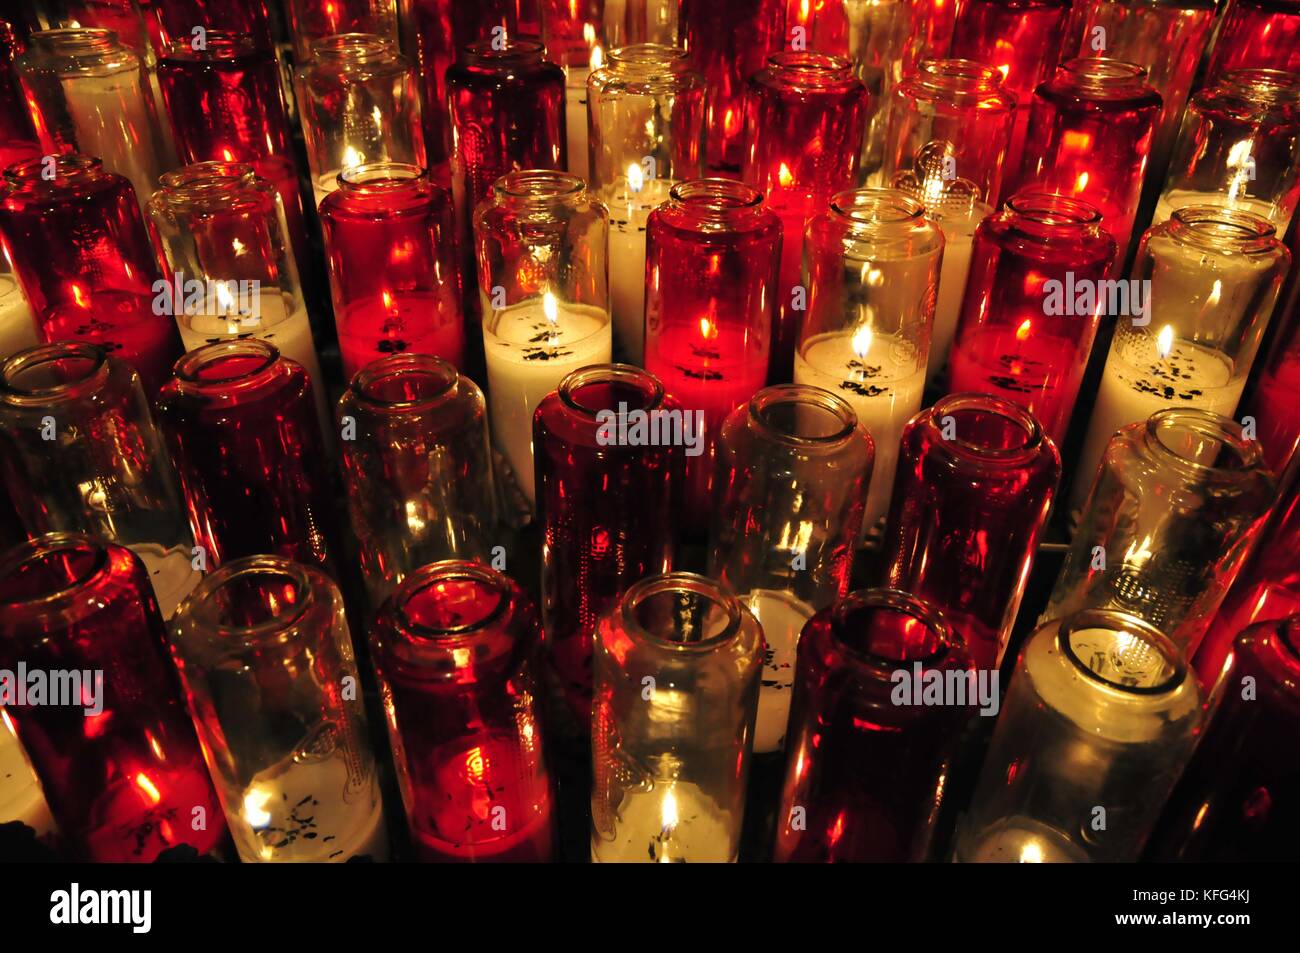 Red glass candle cylinder with cross design 